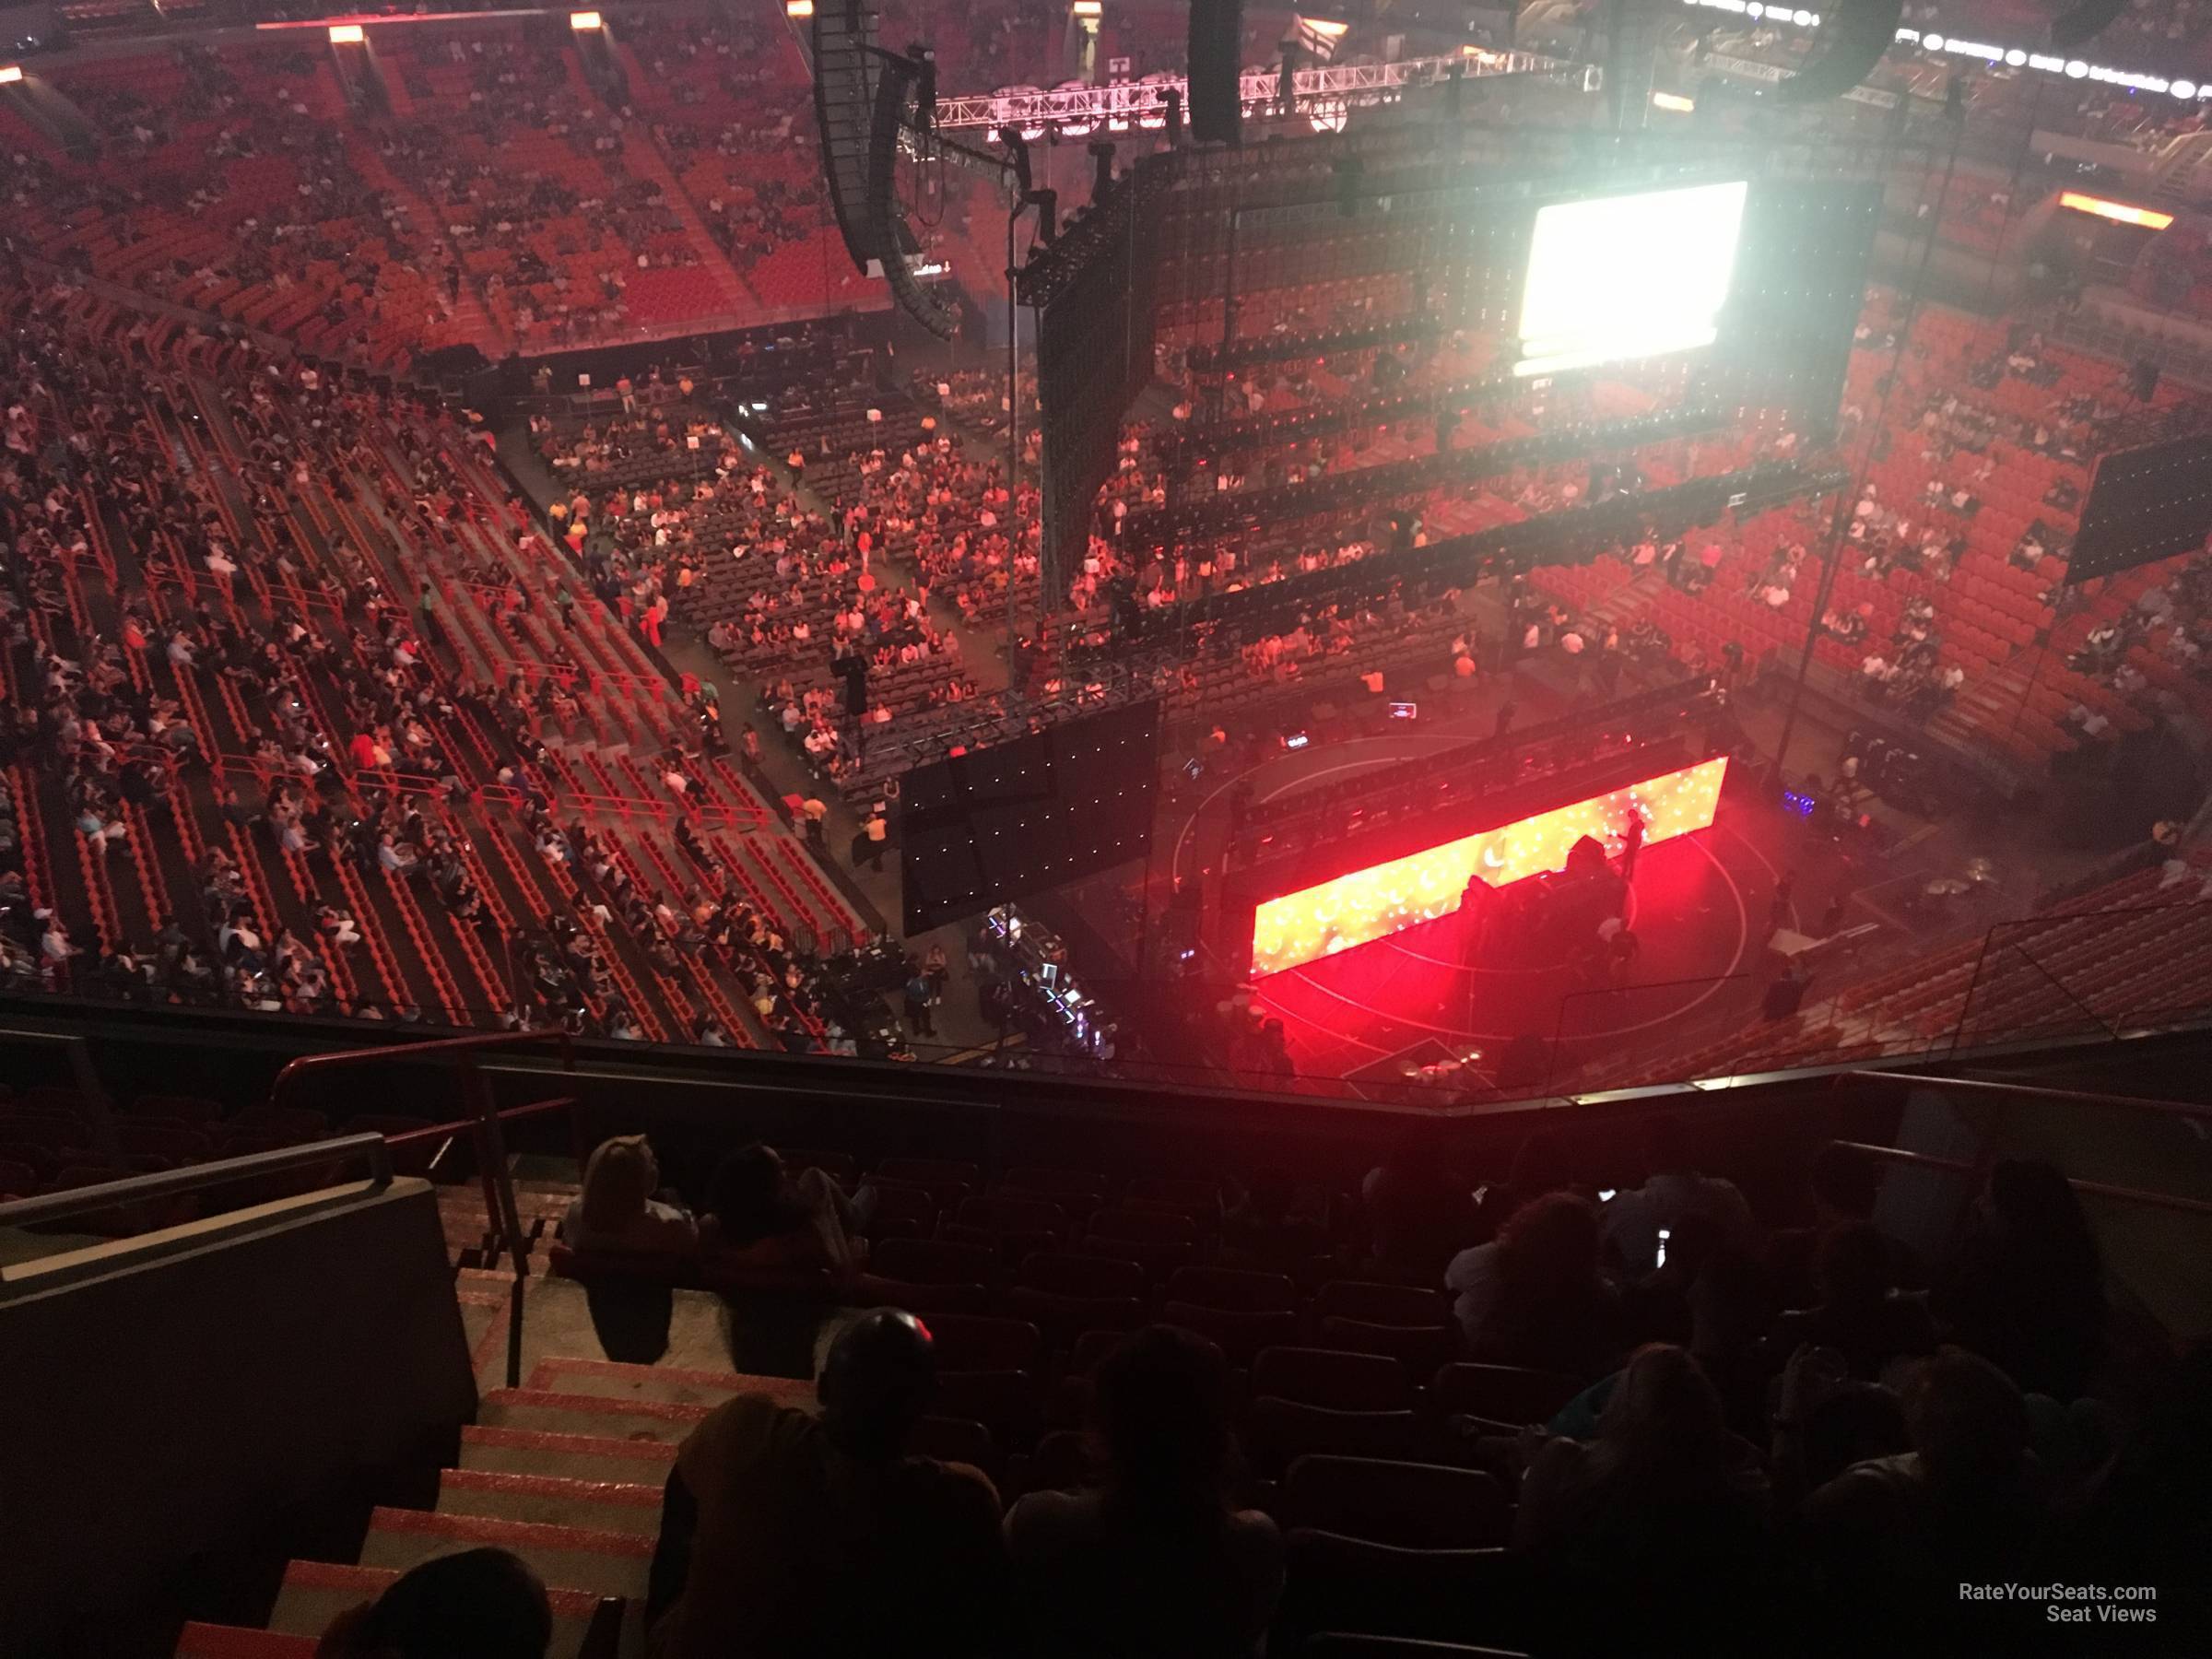 section 408, row 10 seat view  for concert - ftx arena